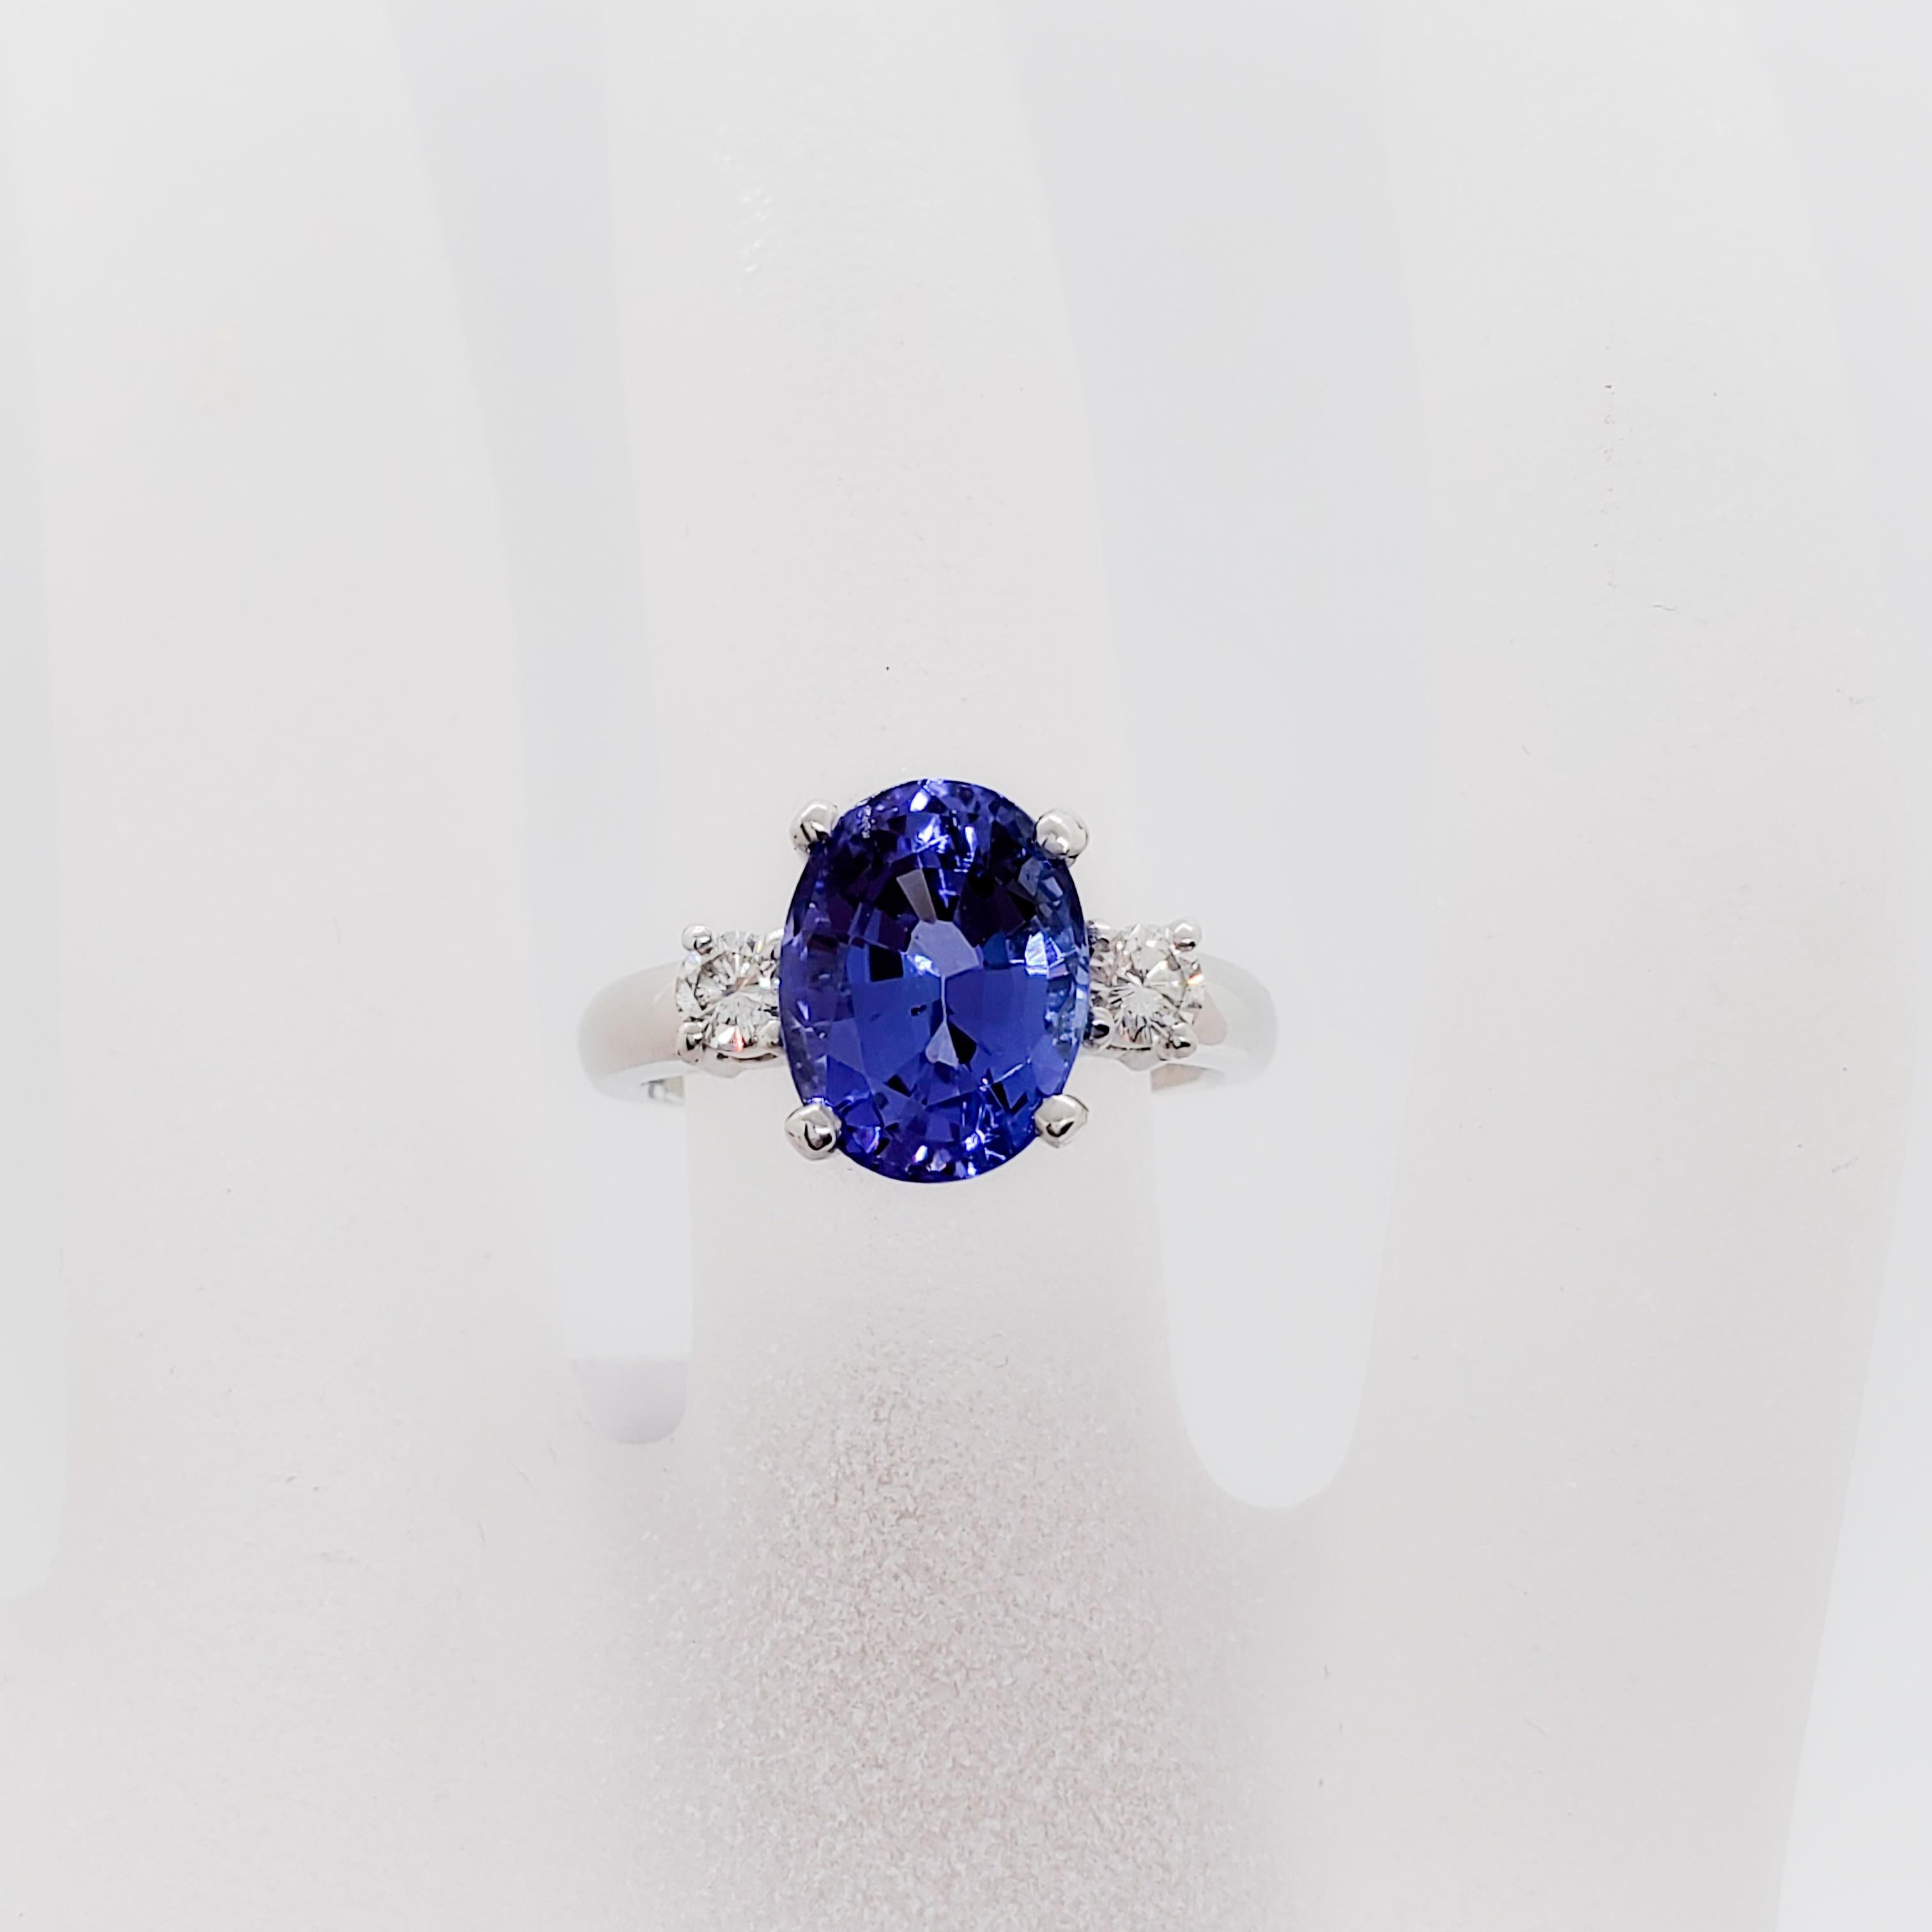 Stunning deep blue purple tanzanite oval weighing 3.49 ct. with 0.25 ct. white diamond rounds that are good quality, white, and clean.  Handmade platinum mounting.  Ring size 6.  Estate piece in mint condition.